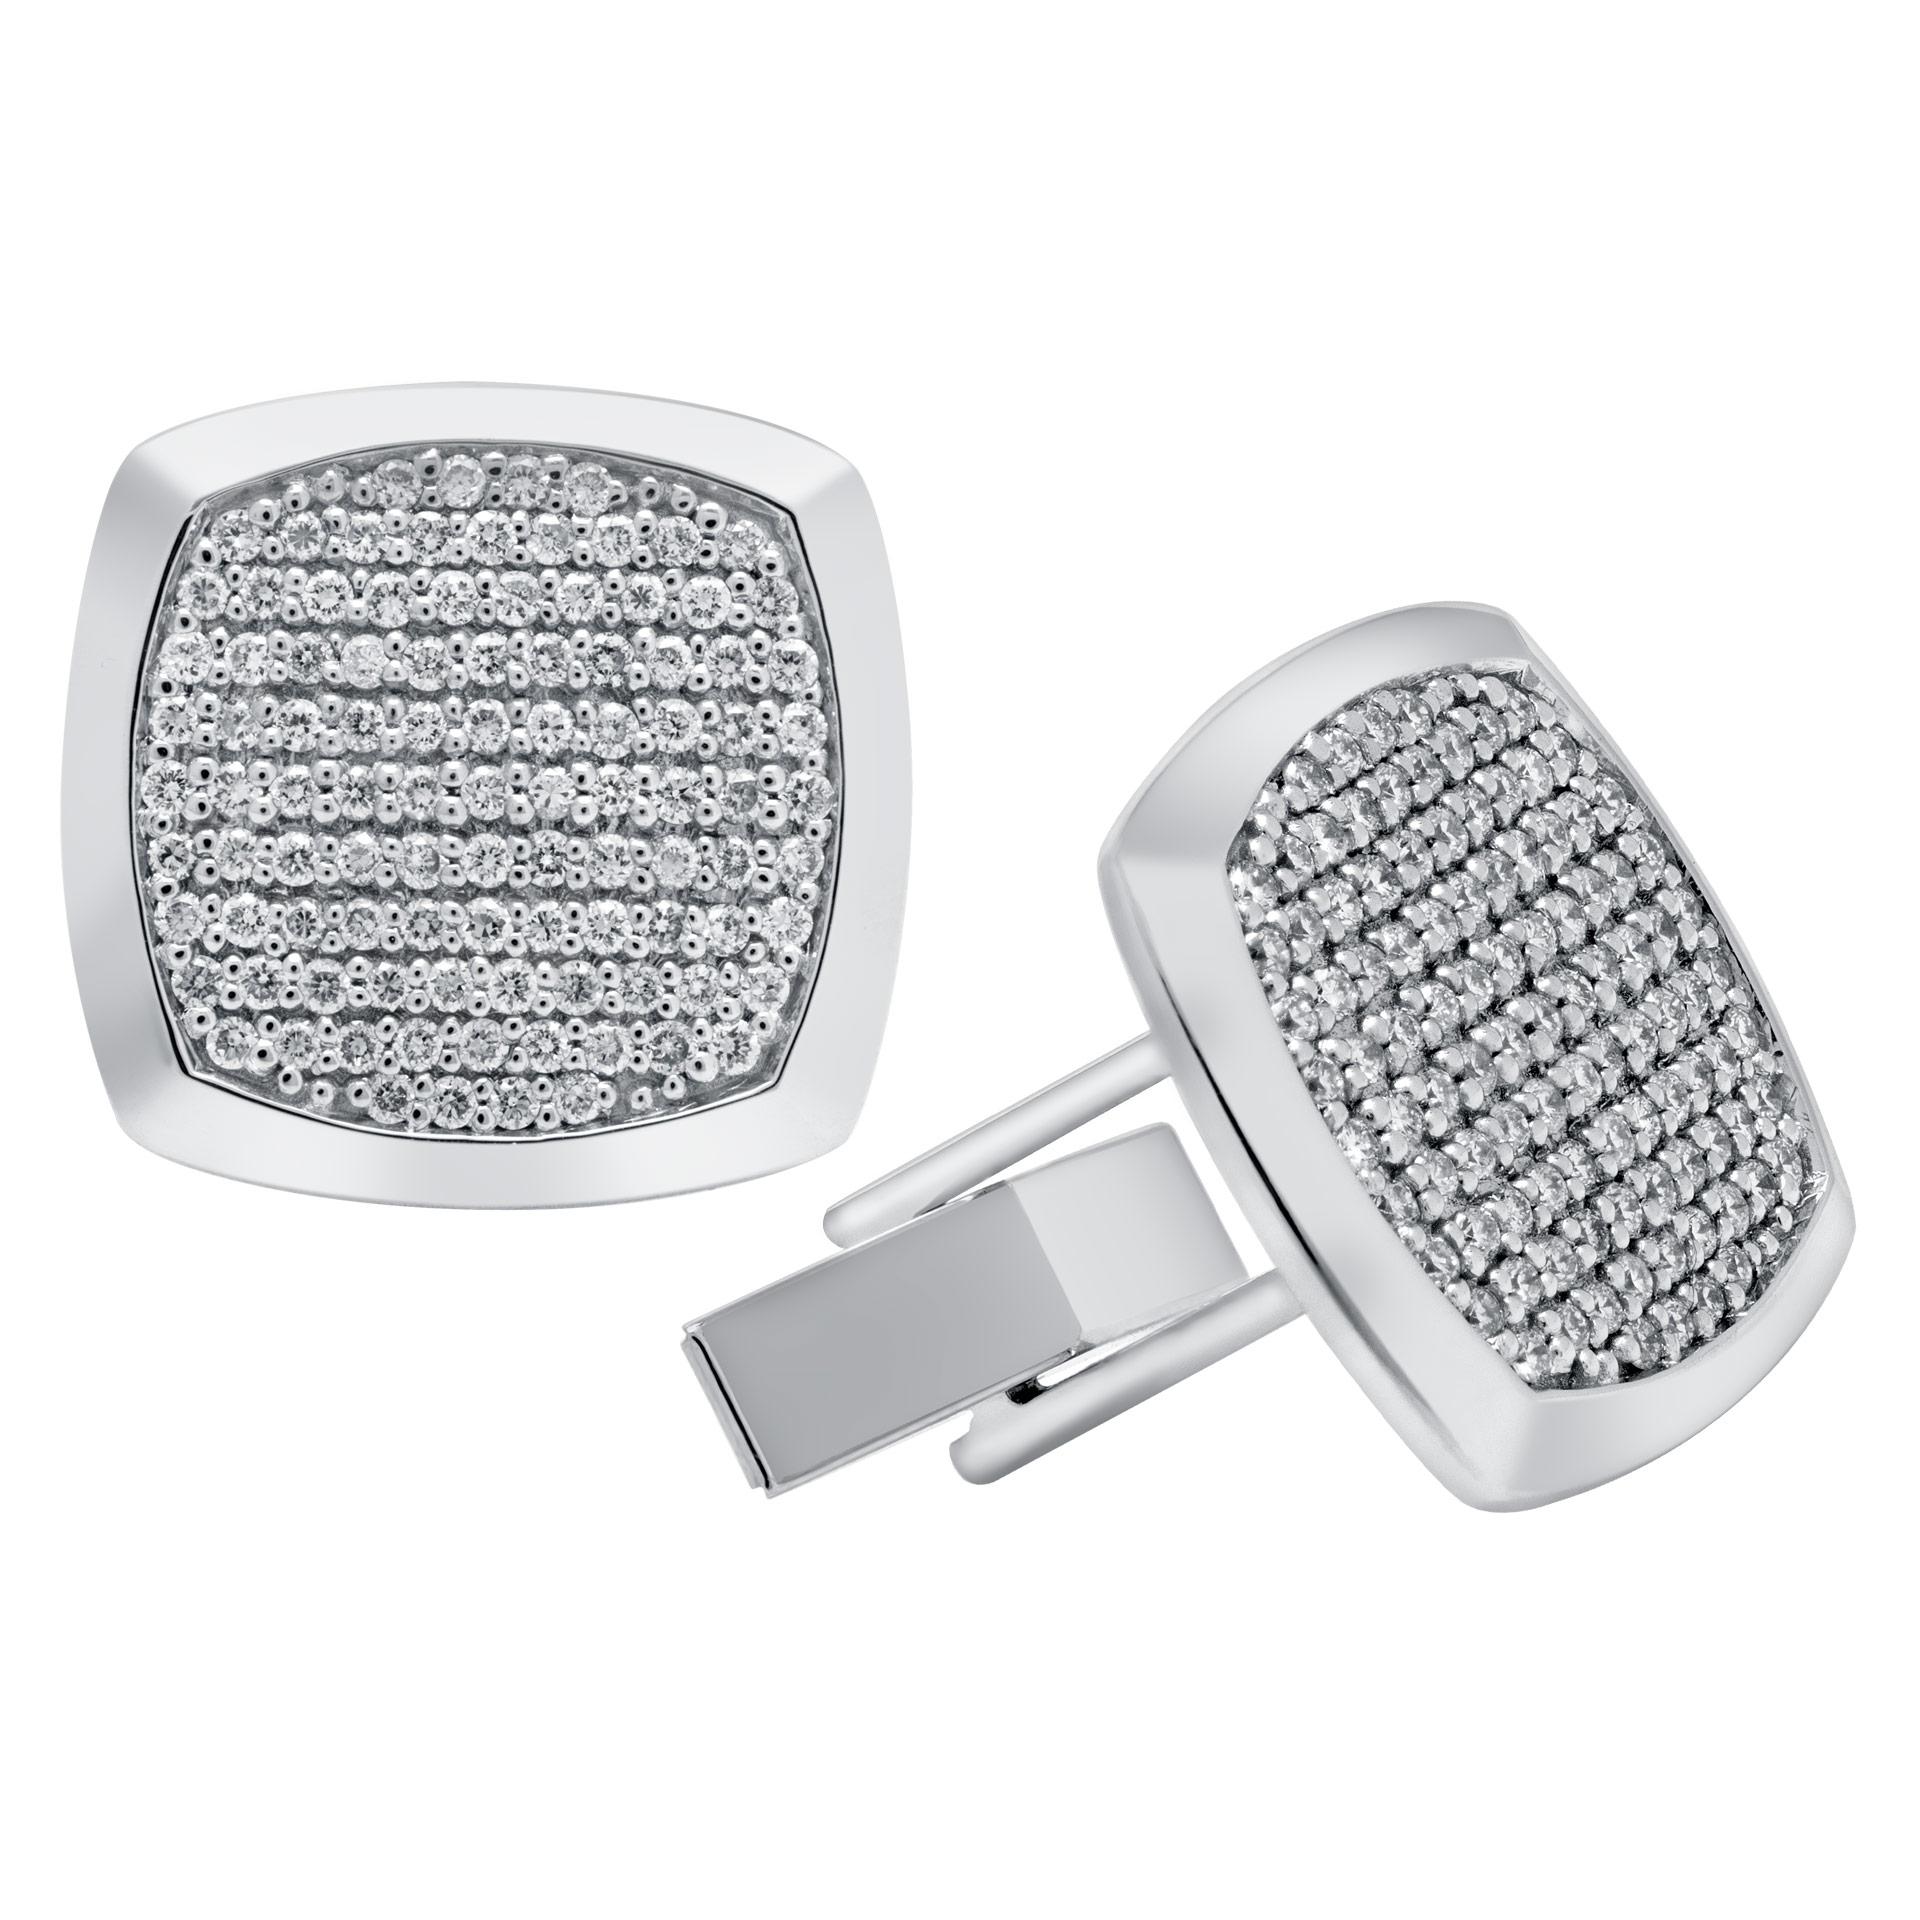 Sparkling unisex diamond cufflinks in 18k white gold with 1.48 carats white clean diamonds.
